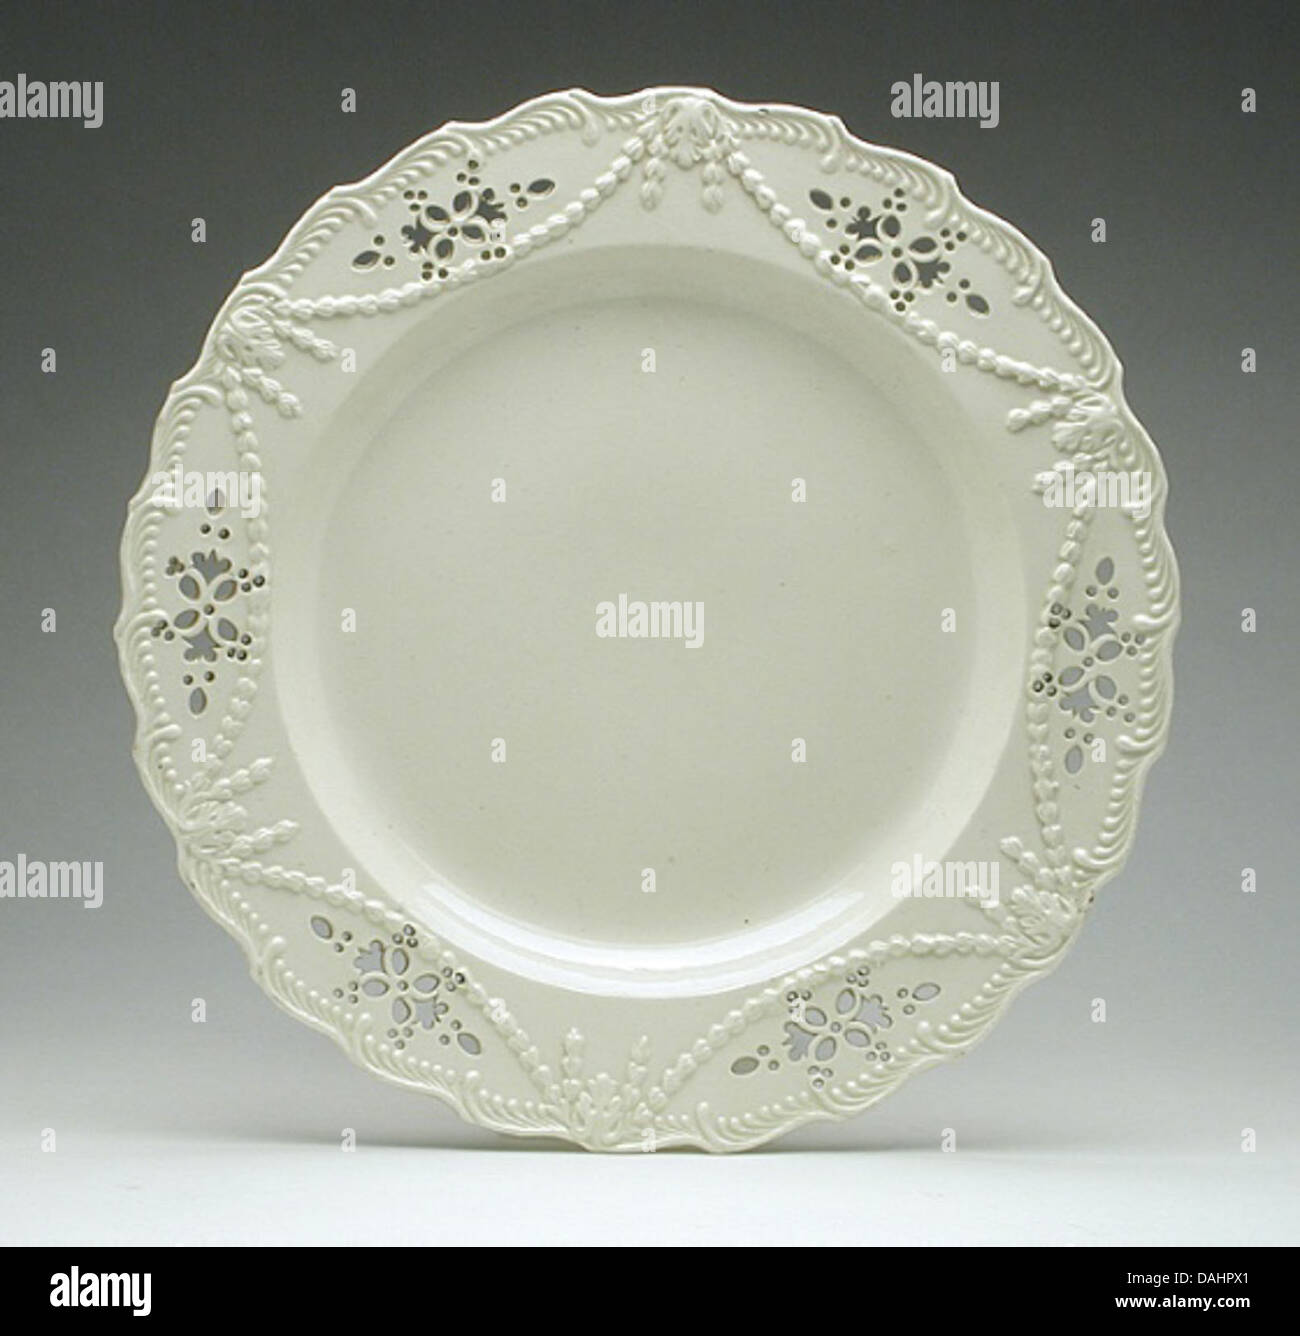 Pair of Plates LACMA AC1997.112.43-.44 (2 of 2) Stock Photo